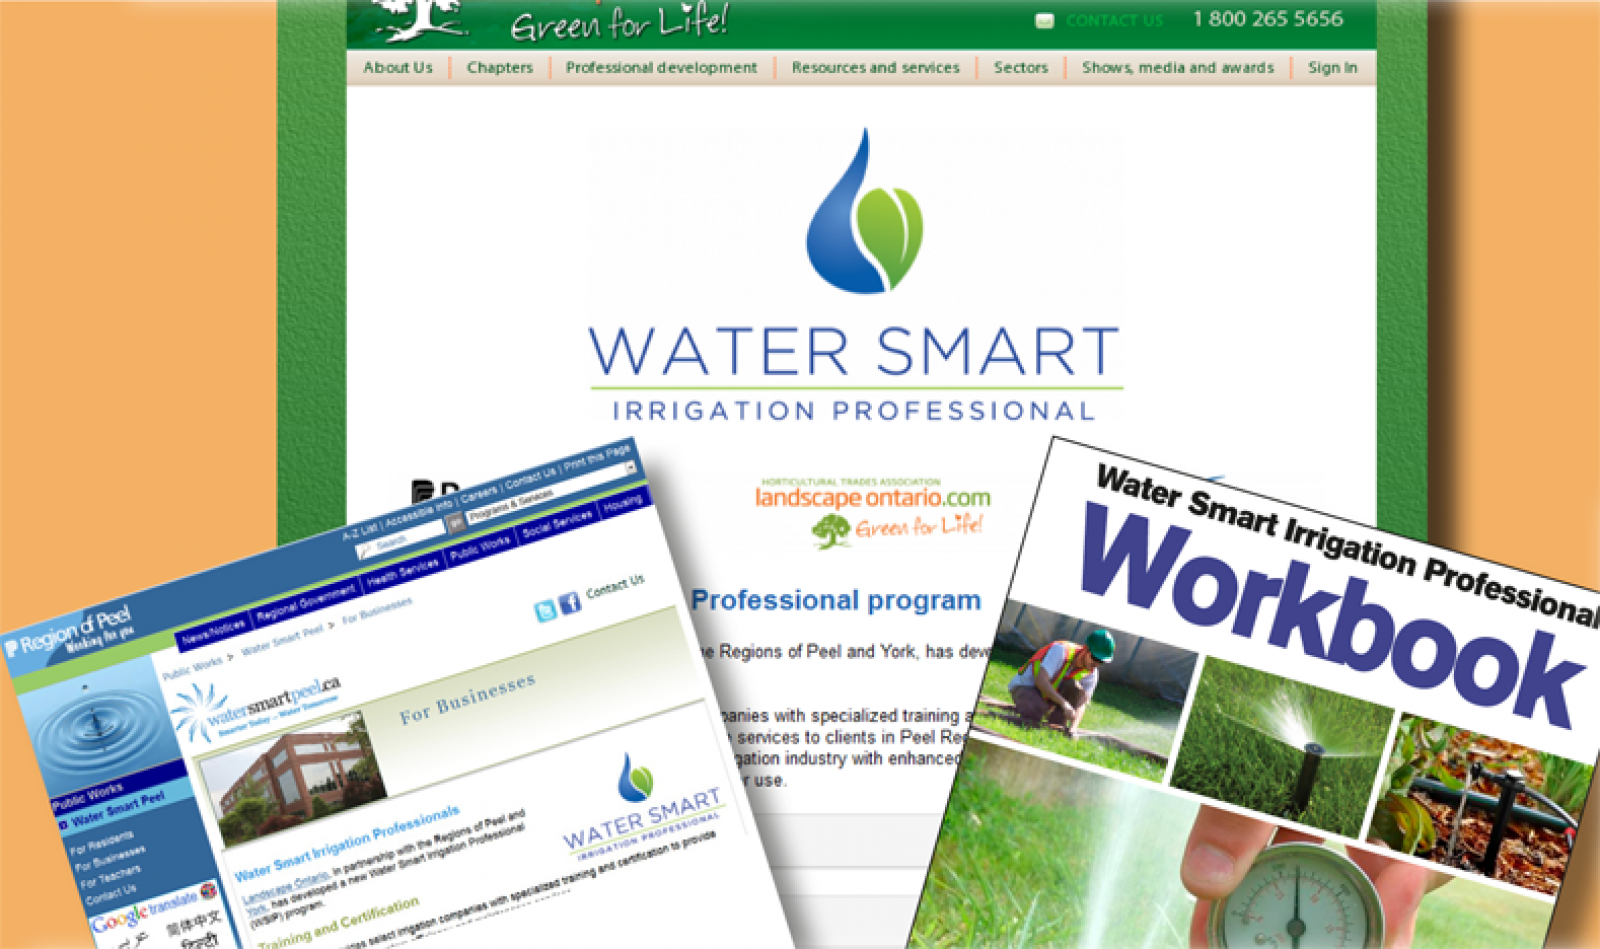 Irrigation Group develops water-smart program with Peel and York